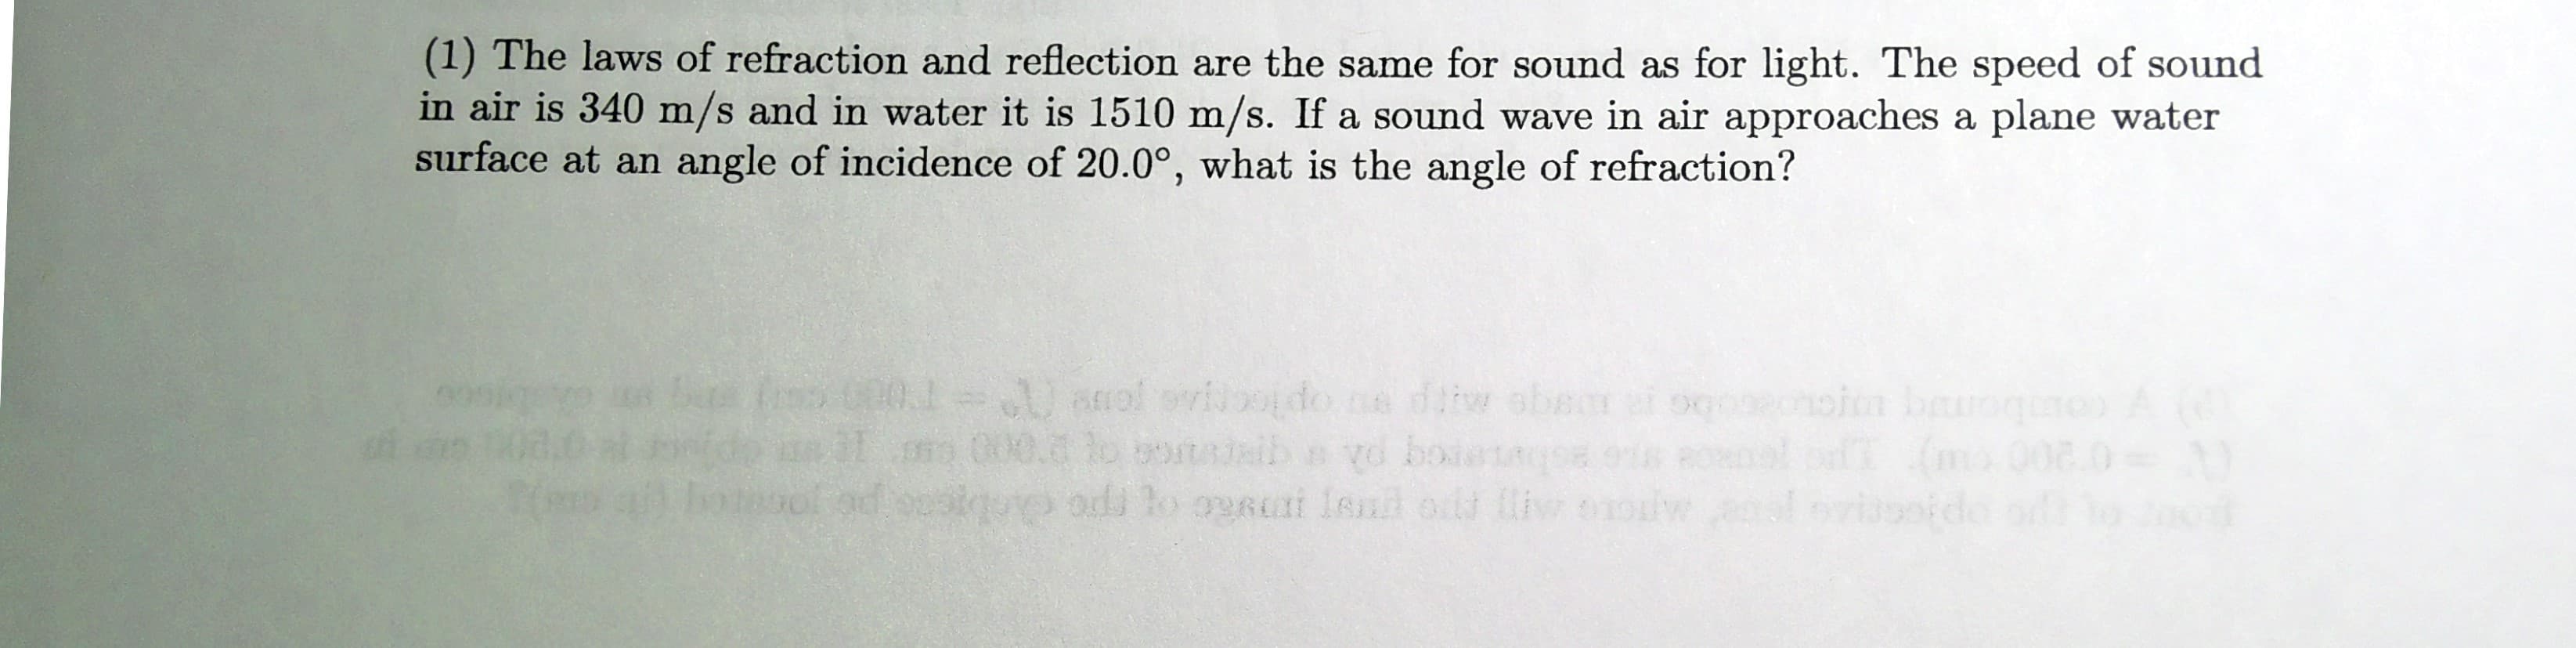 (1) The laws of refraction and reflection are the same for sound as for light. The speed of sound
in air is 340 m/s and in water it is 1510 m/s. If a sound wave in air approaches a plane water
surface at an angle of incidence of 20.0°, what is the angle of refraction?
